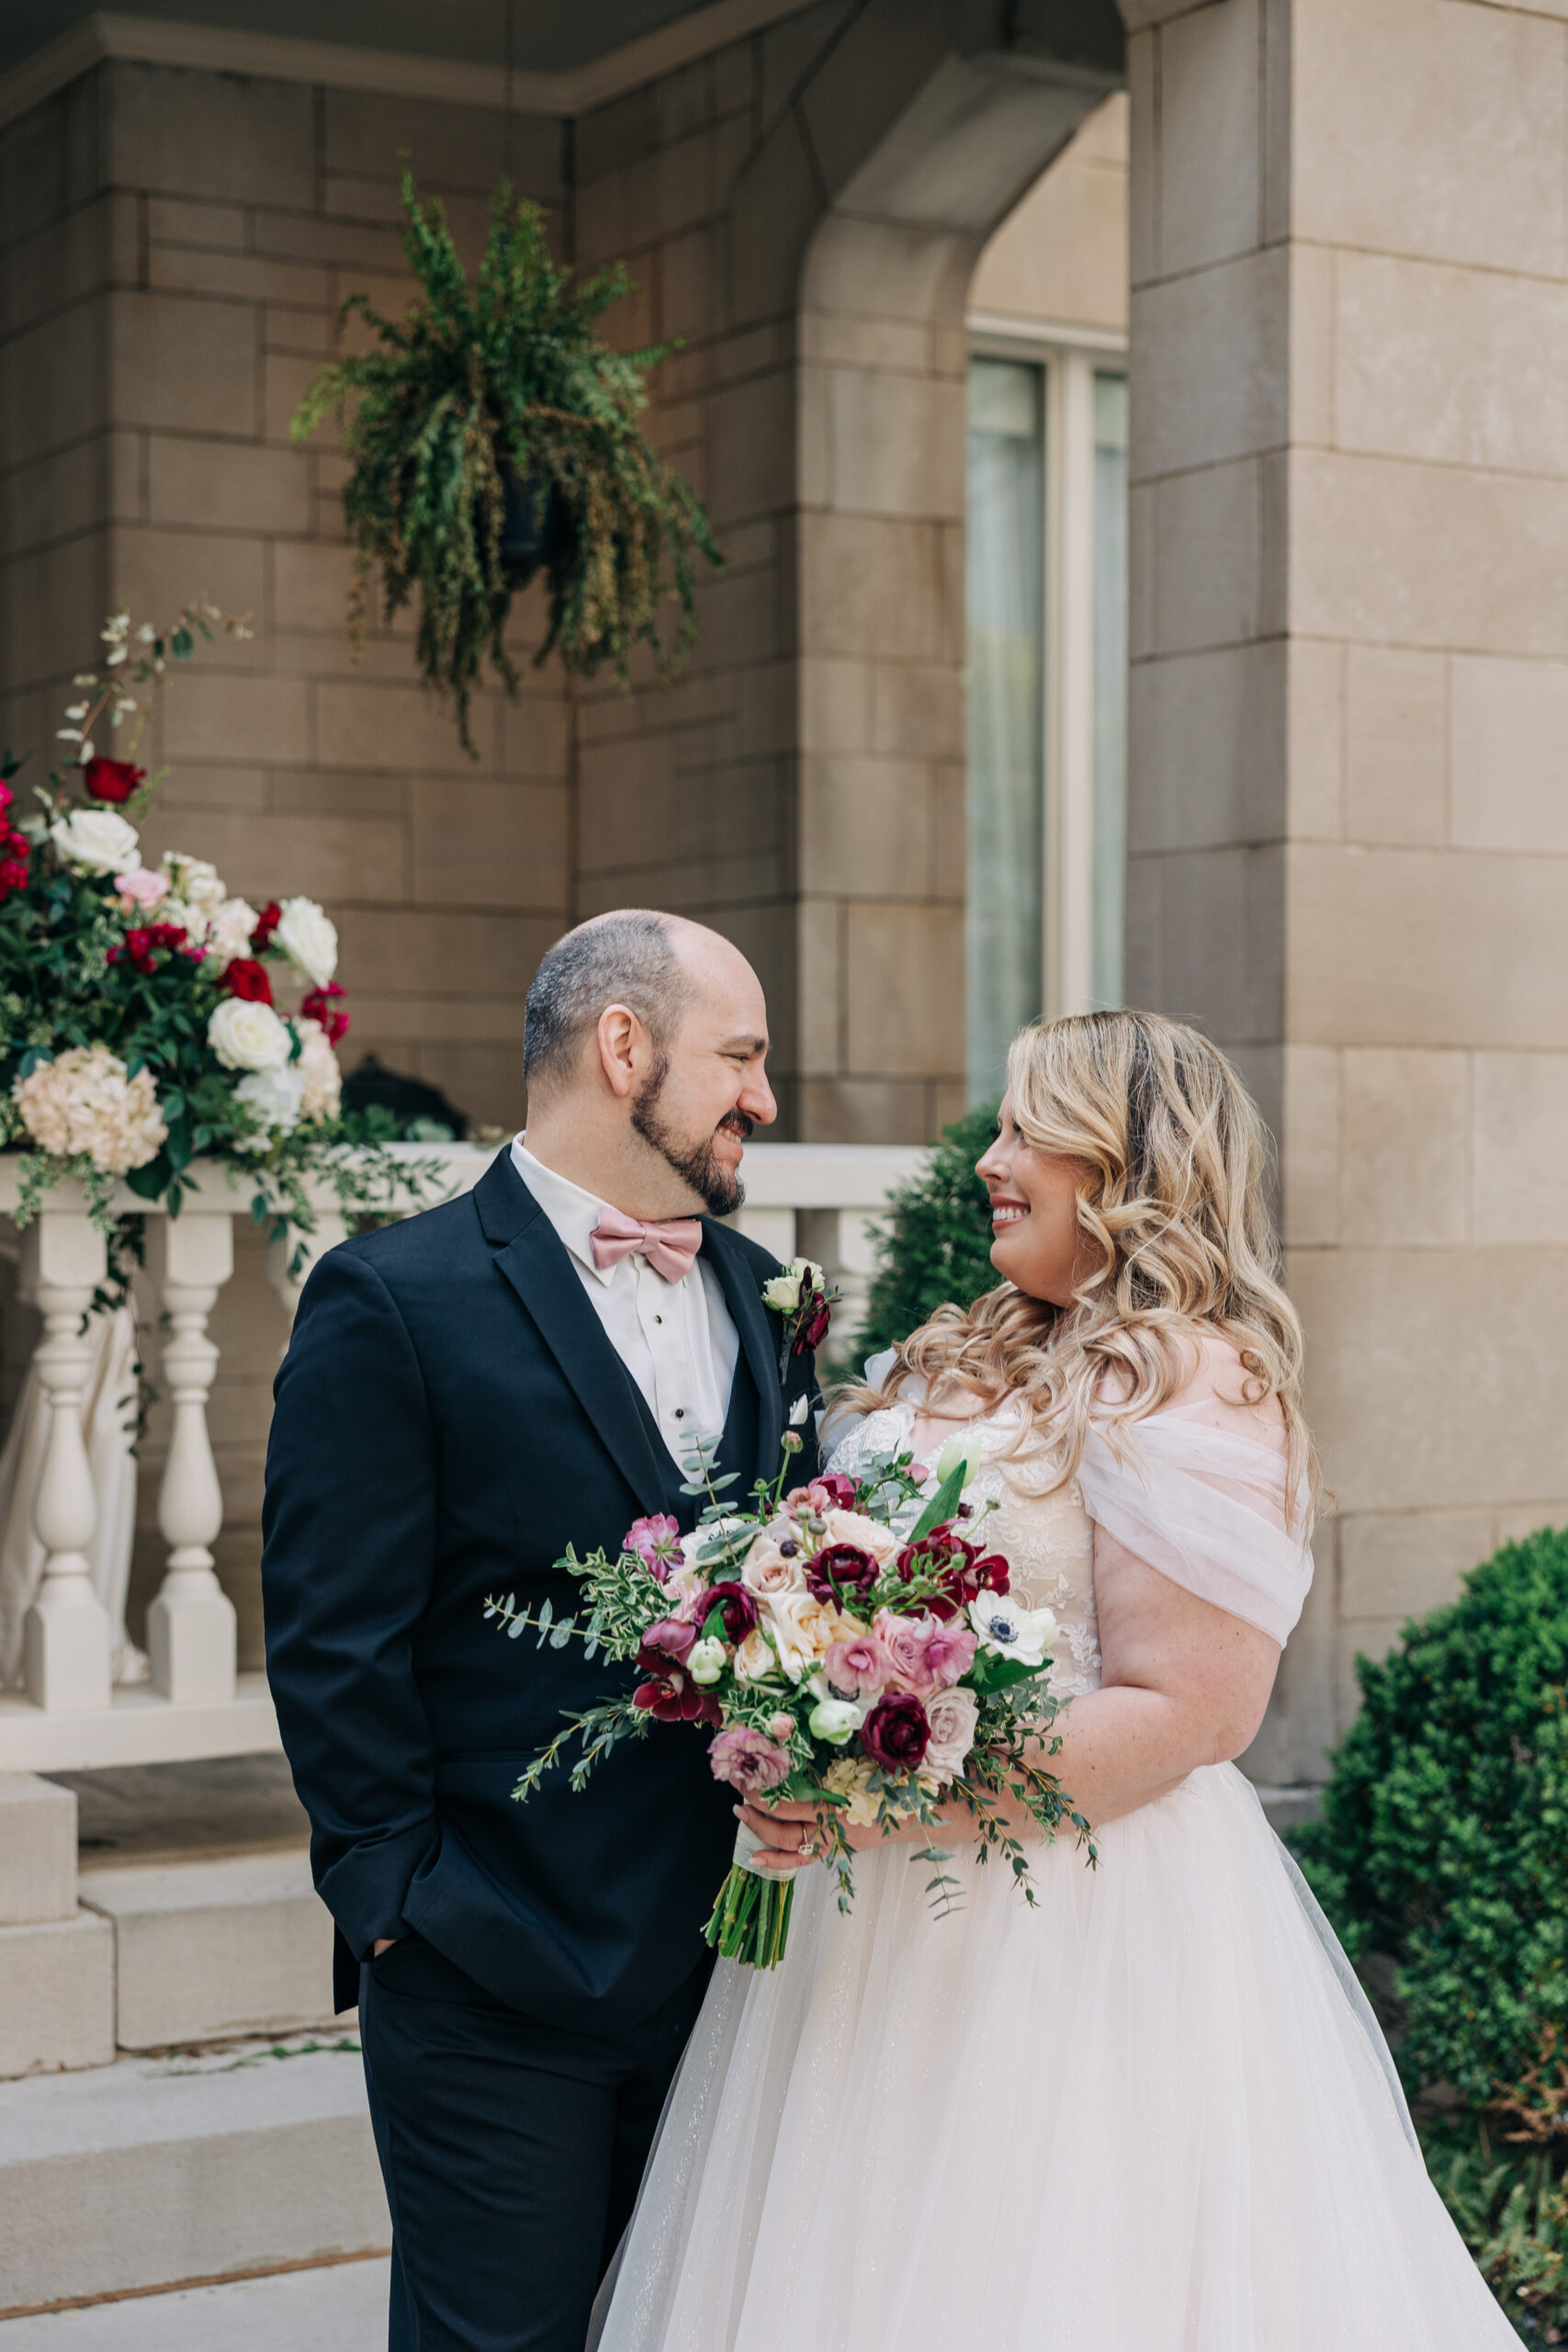 Newlyweds laugh with each other while standing outside the front porch holding the colorful bouquet